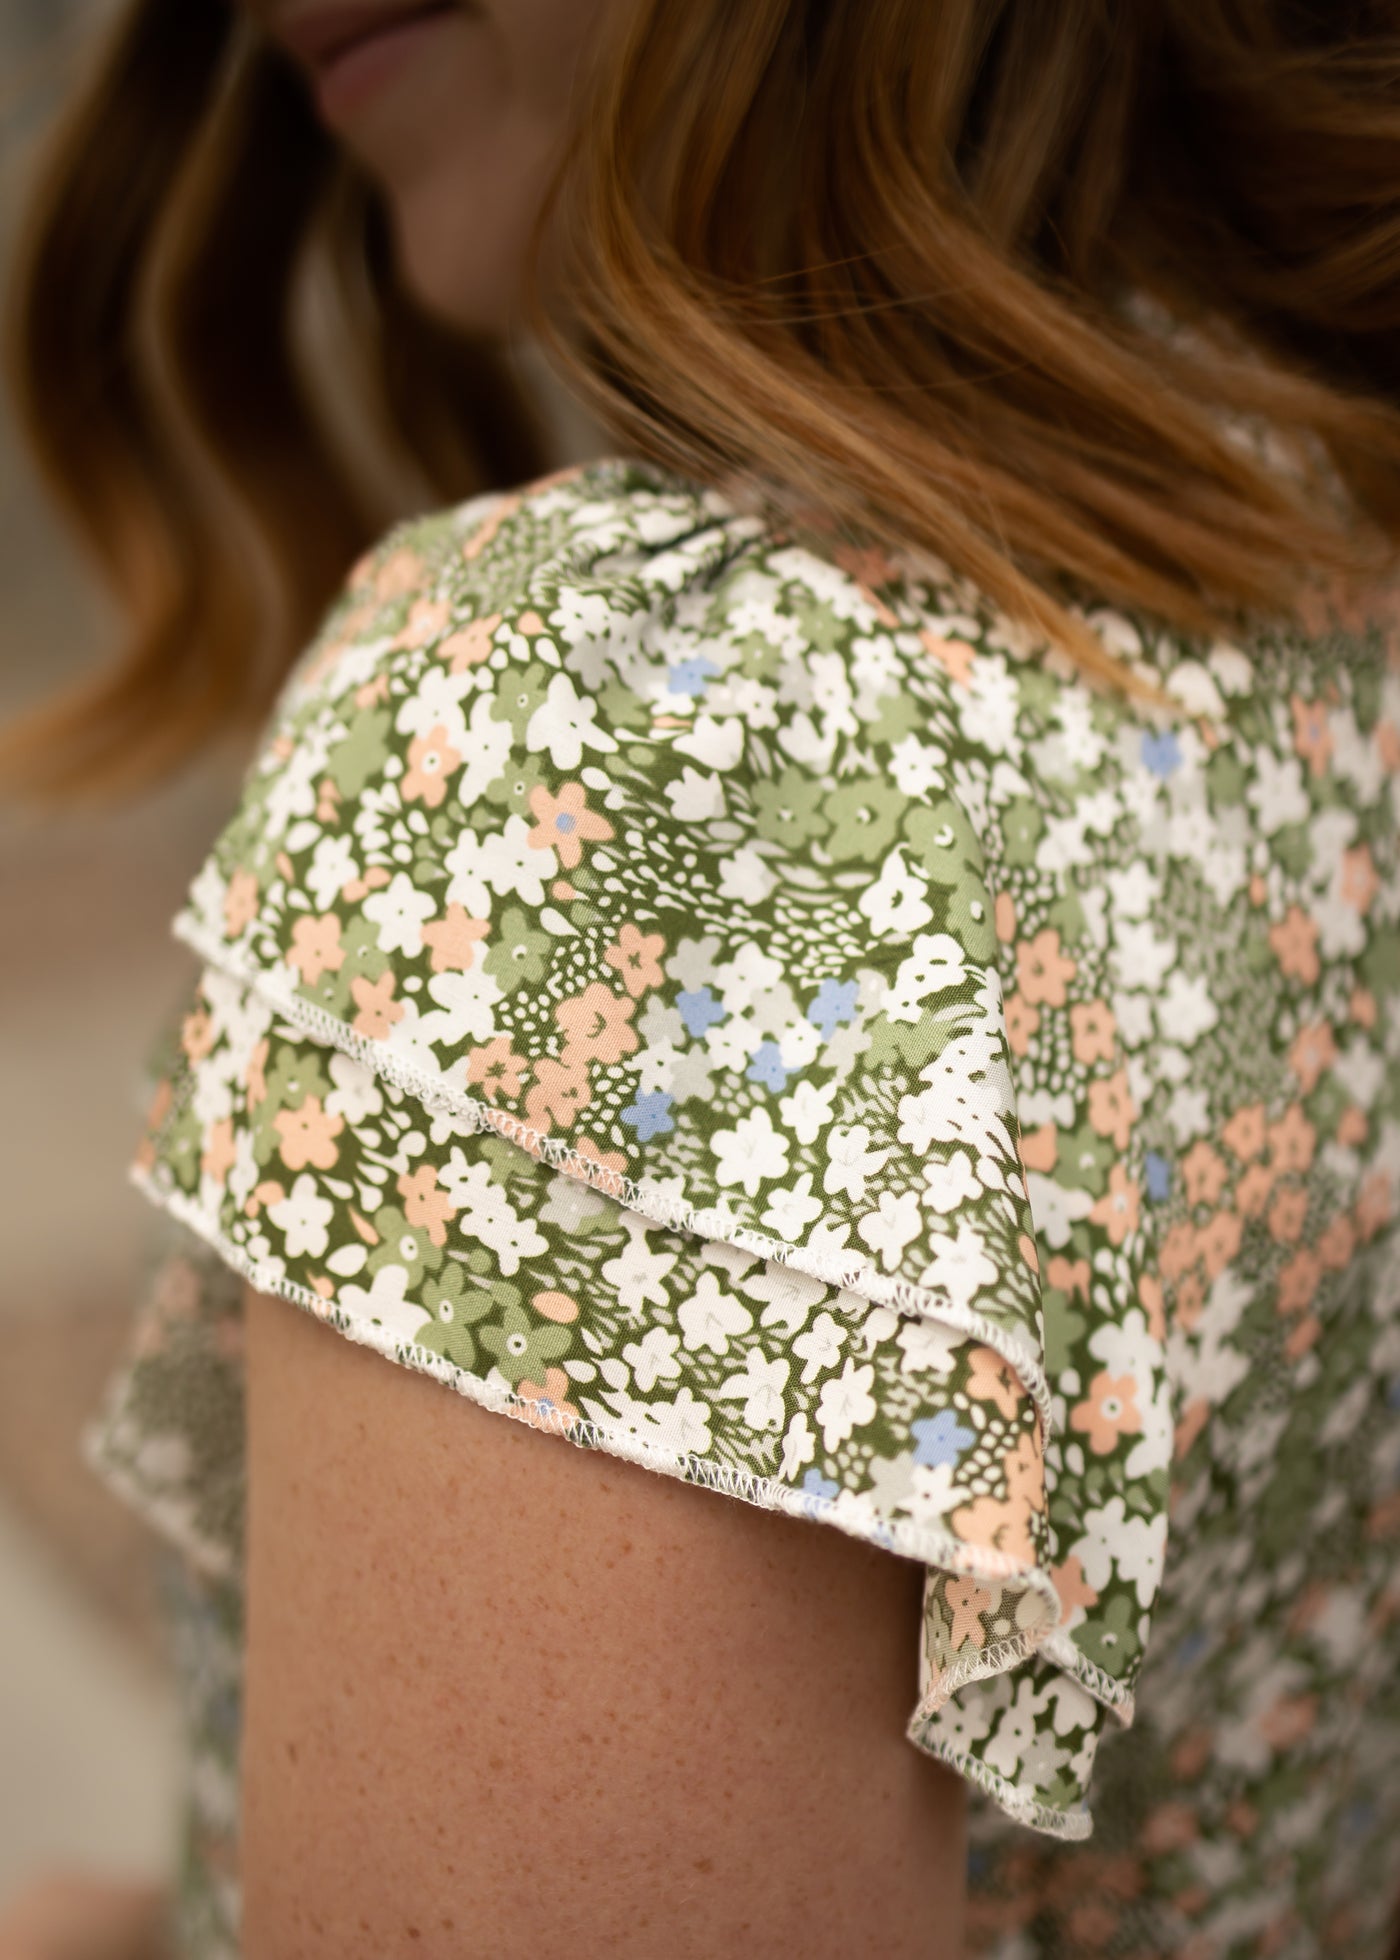 Cap sleeve of a green floral top